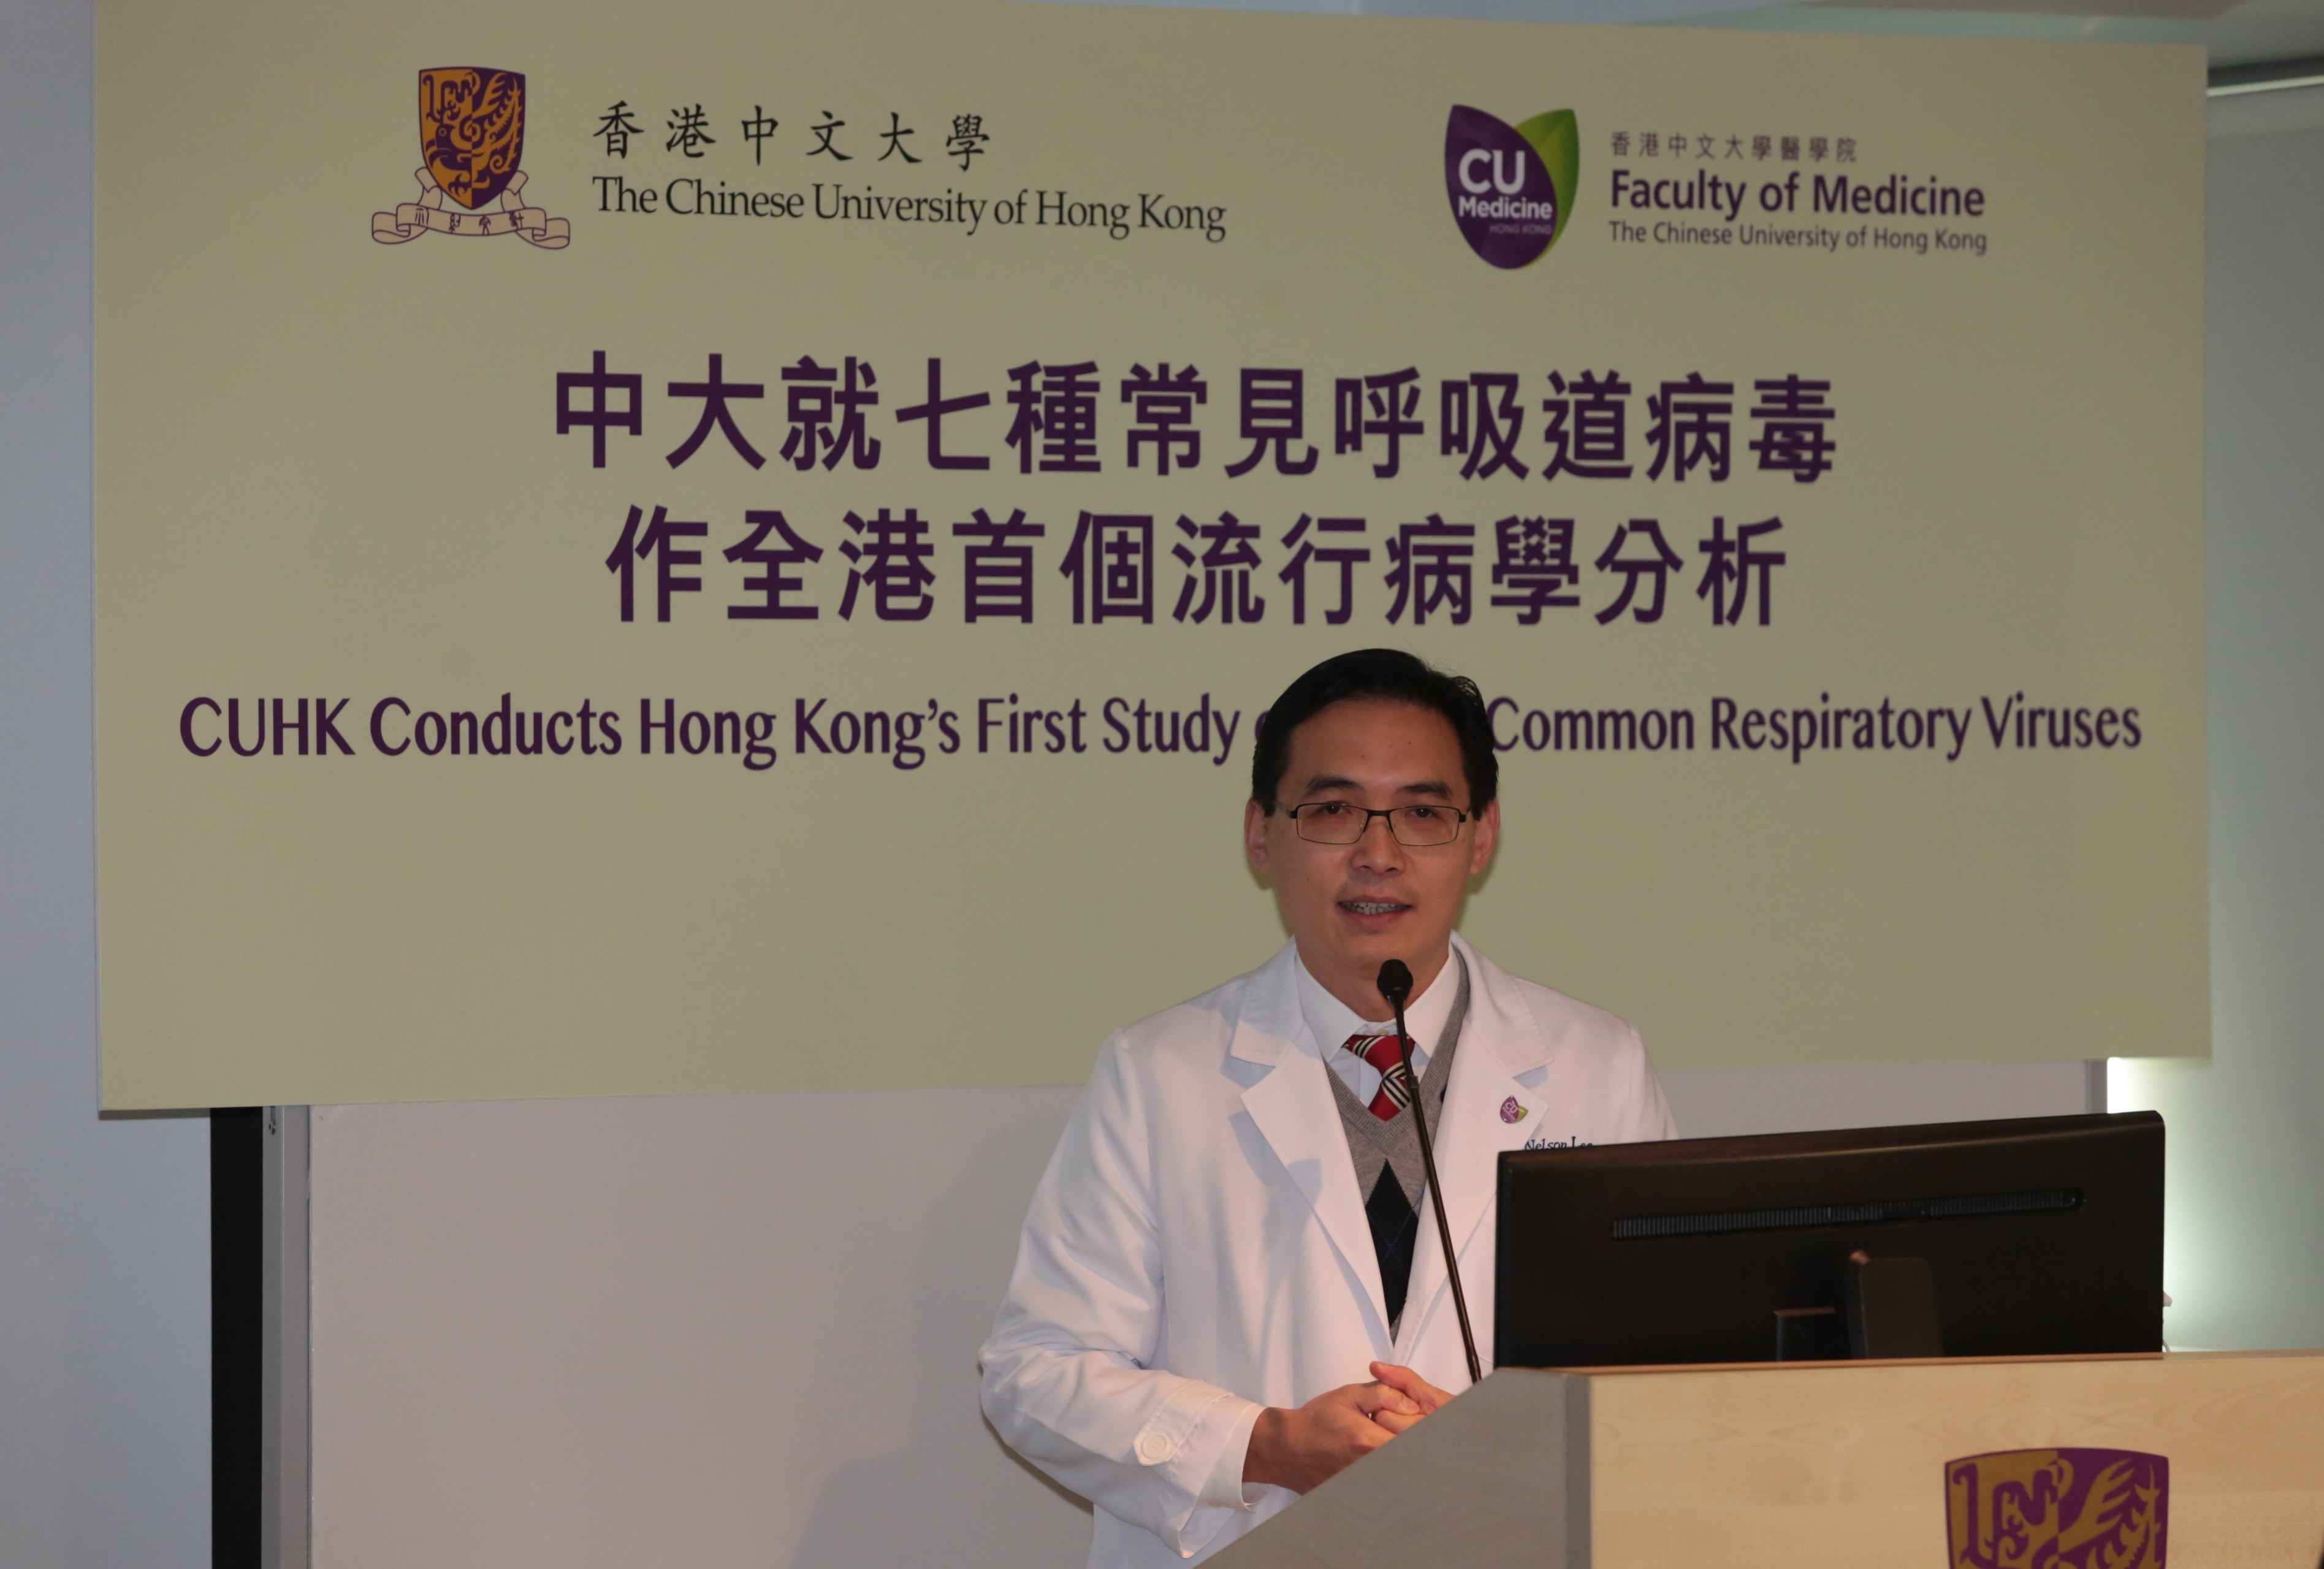 Prof. Nelson LEE, Head, Division of Infectious Diseases, Department of Medicine & Therapeutics highlights that vaccination is a safe and effective means for prevention of influenza virus.